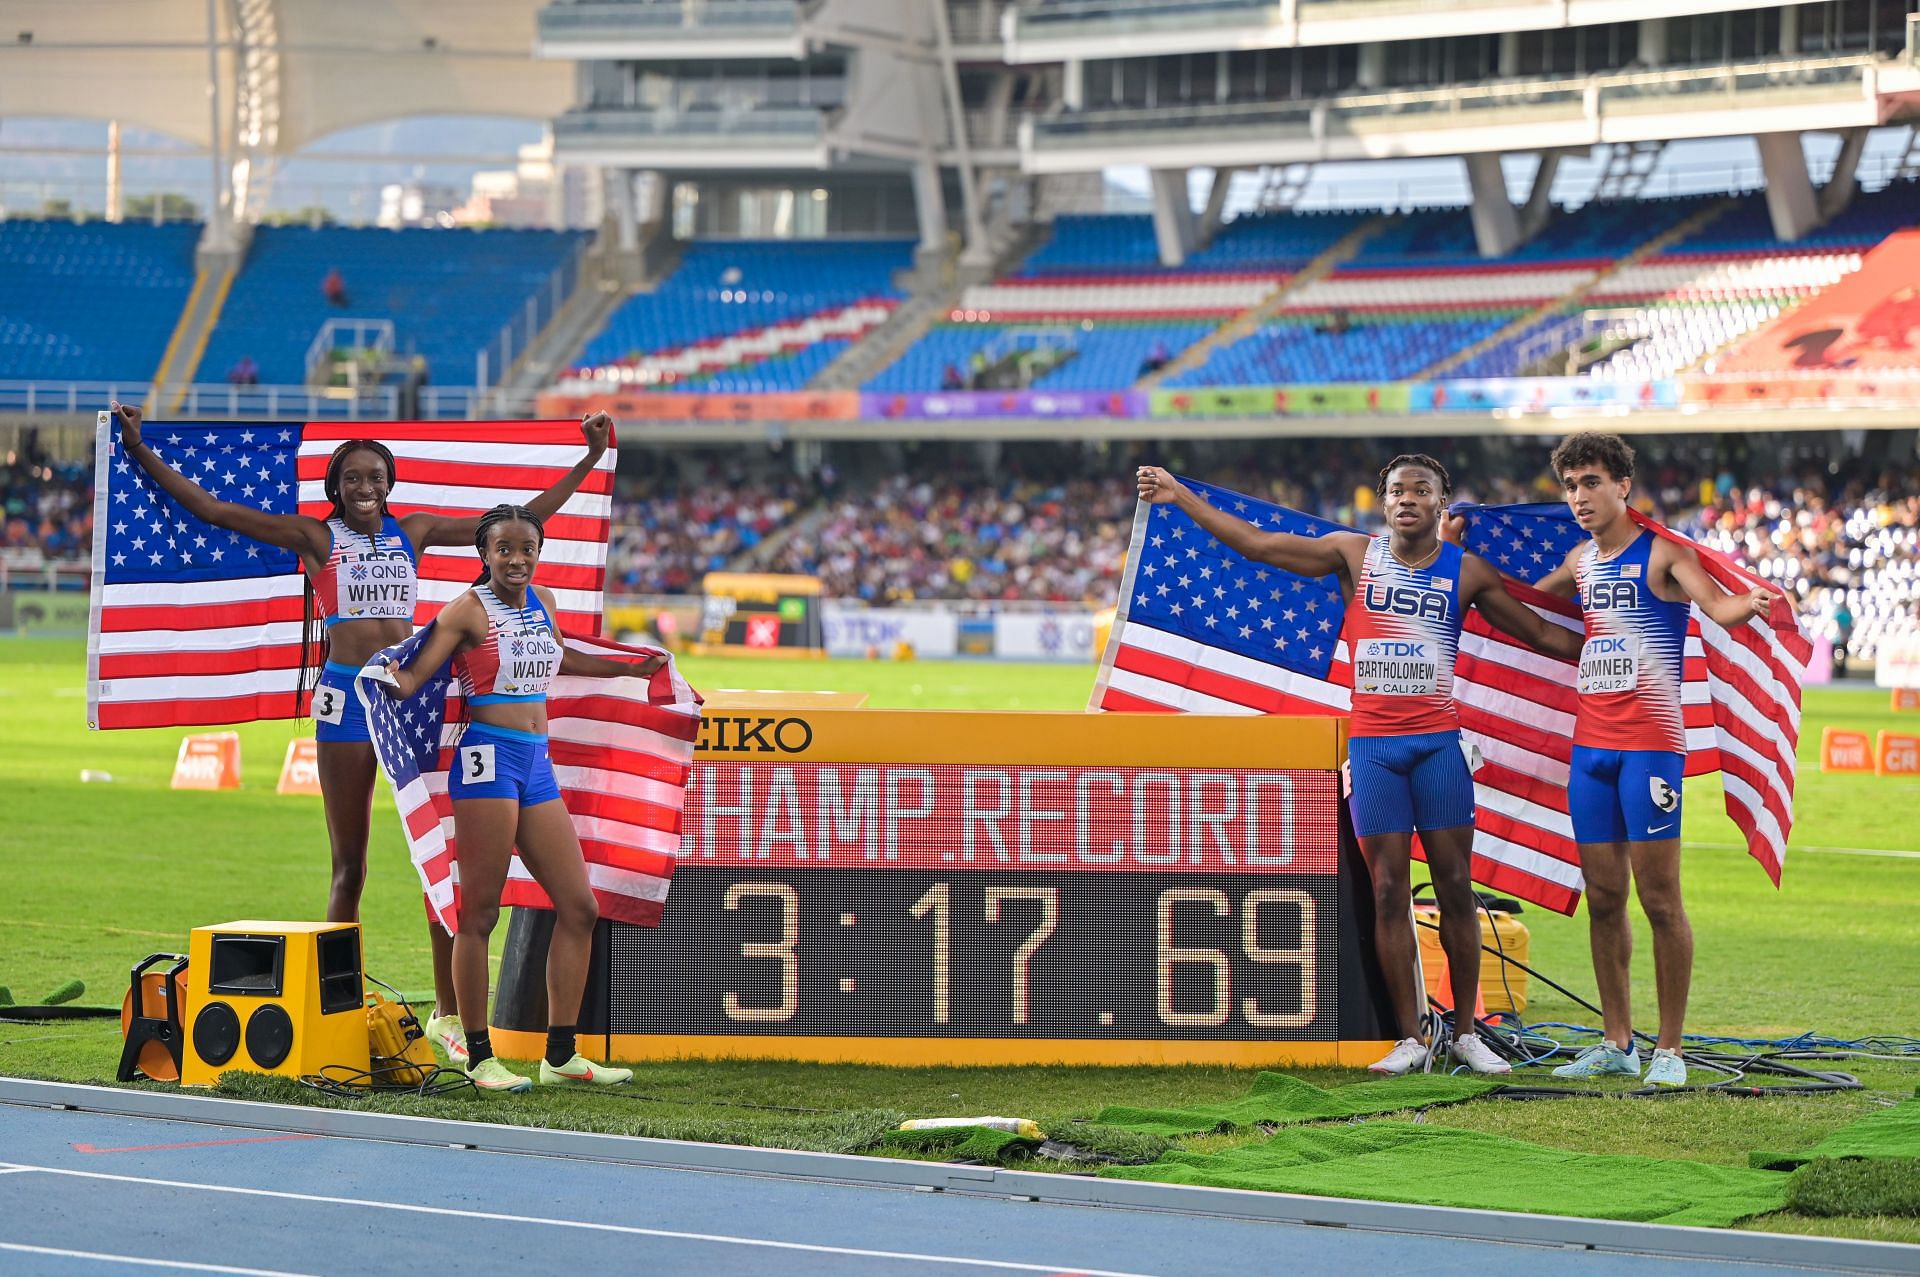 USA wins the 4x400m mixed relay